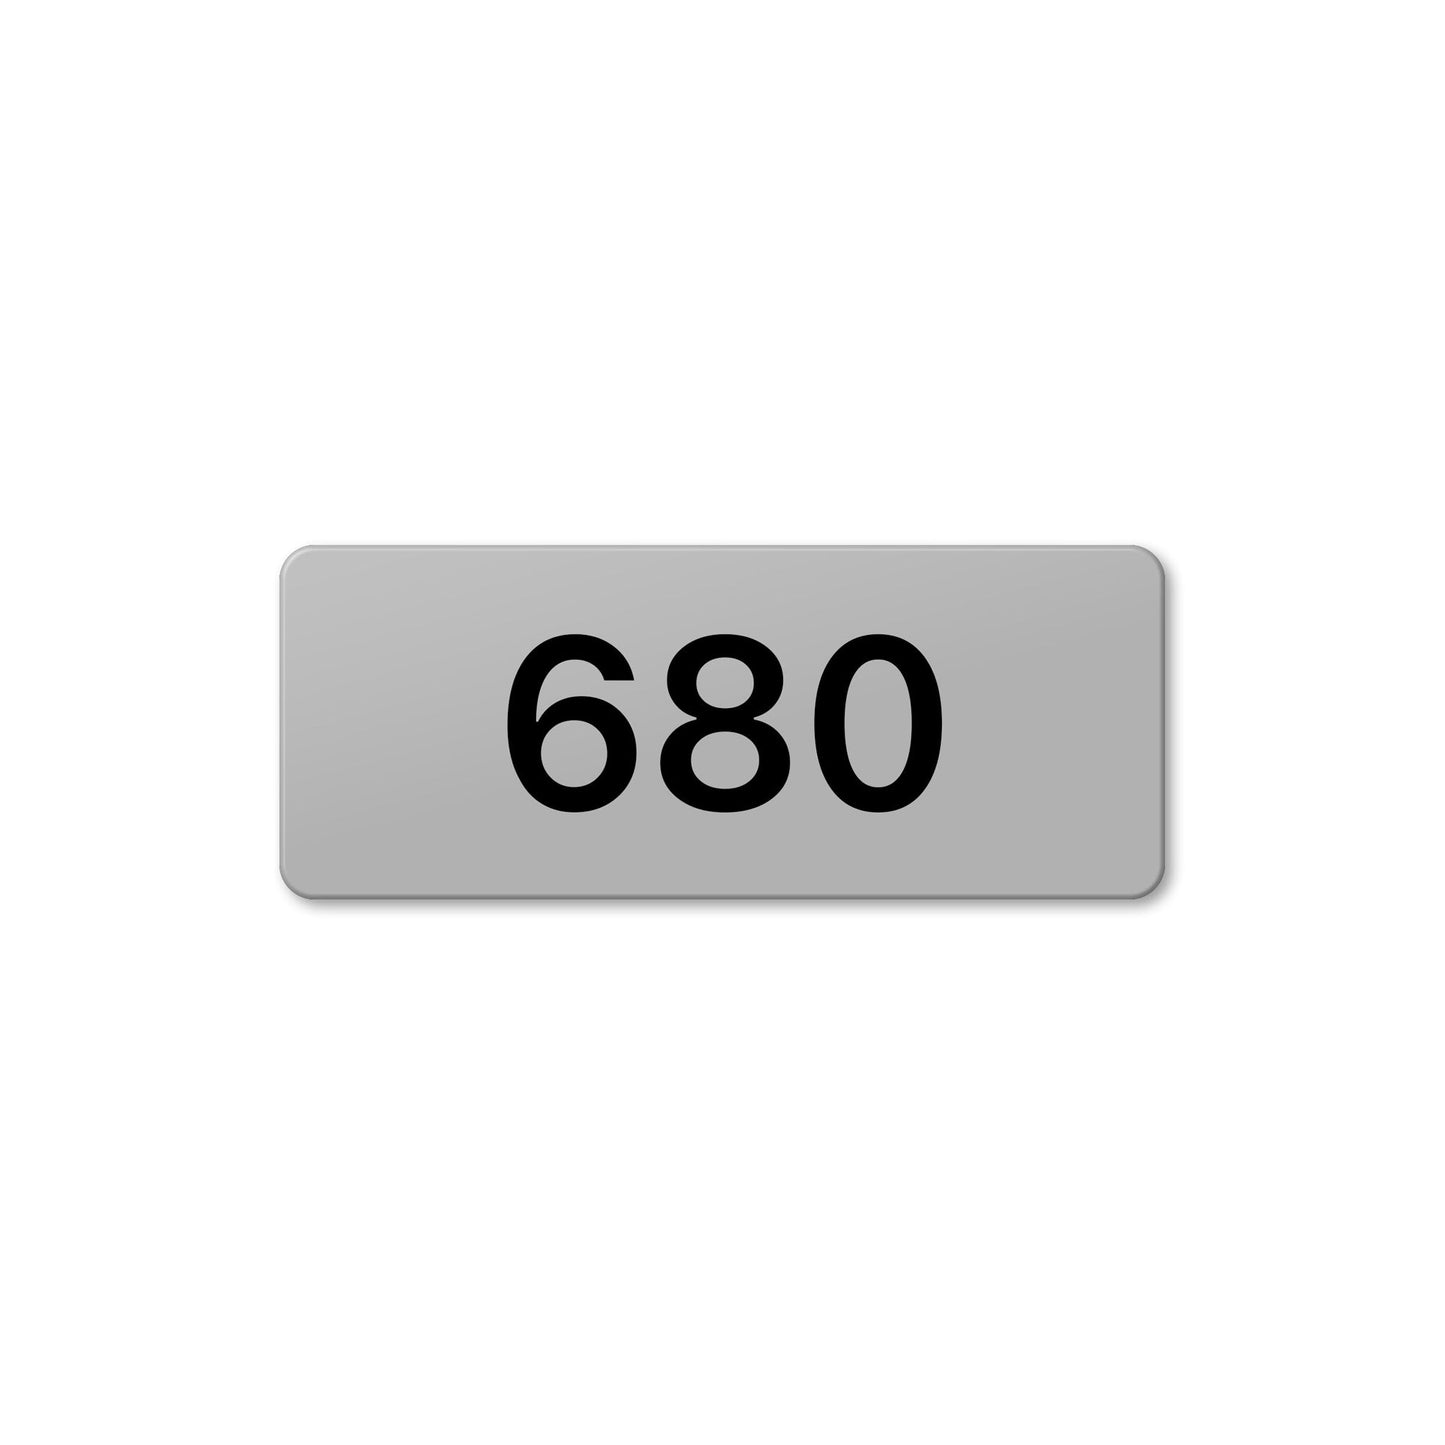 Numeral 680